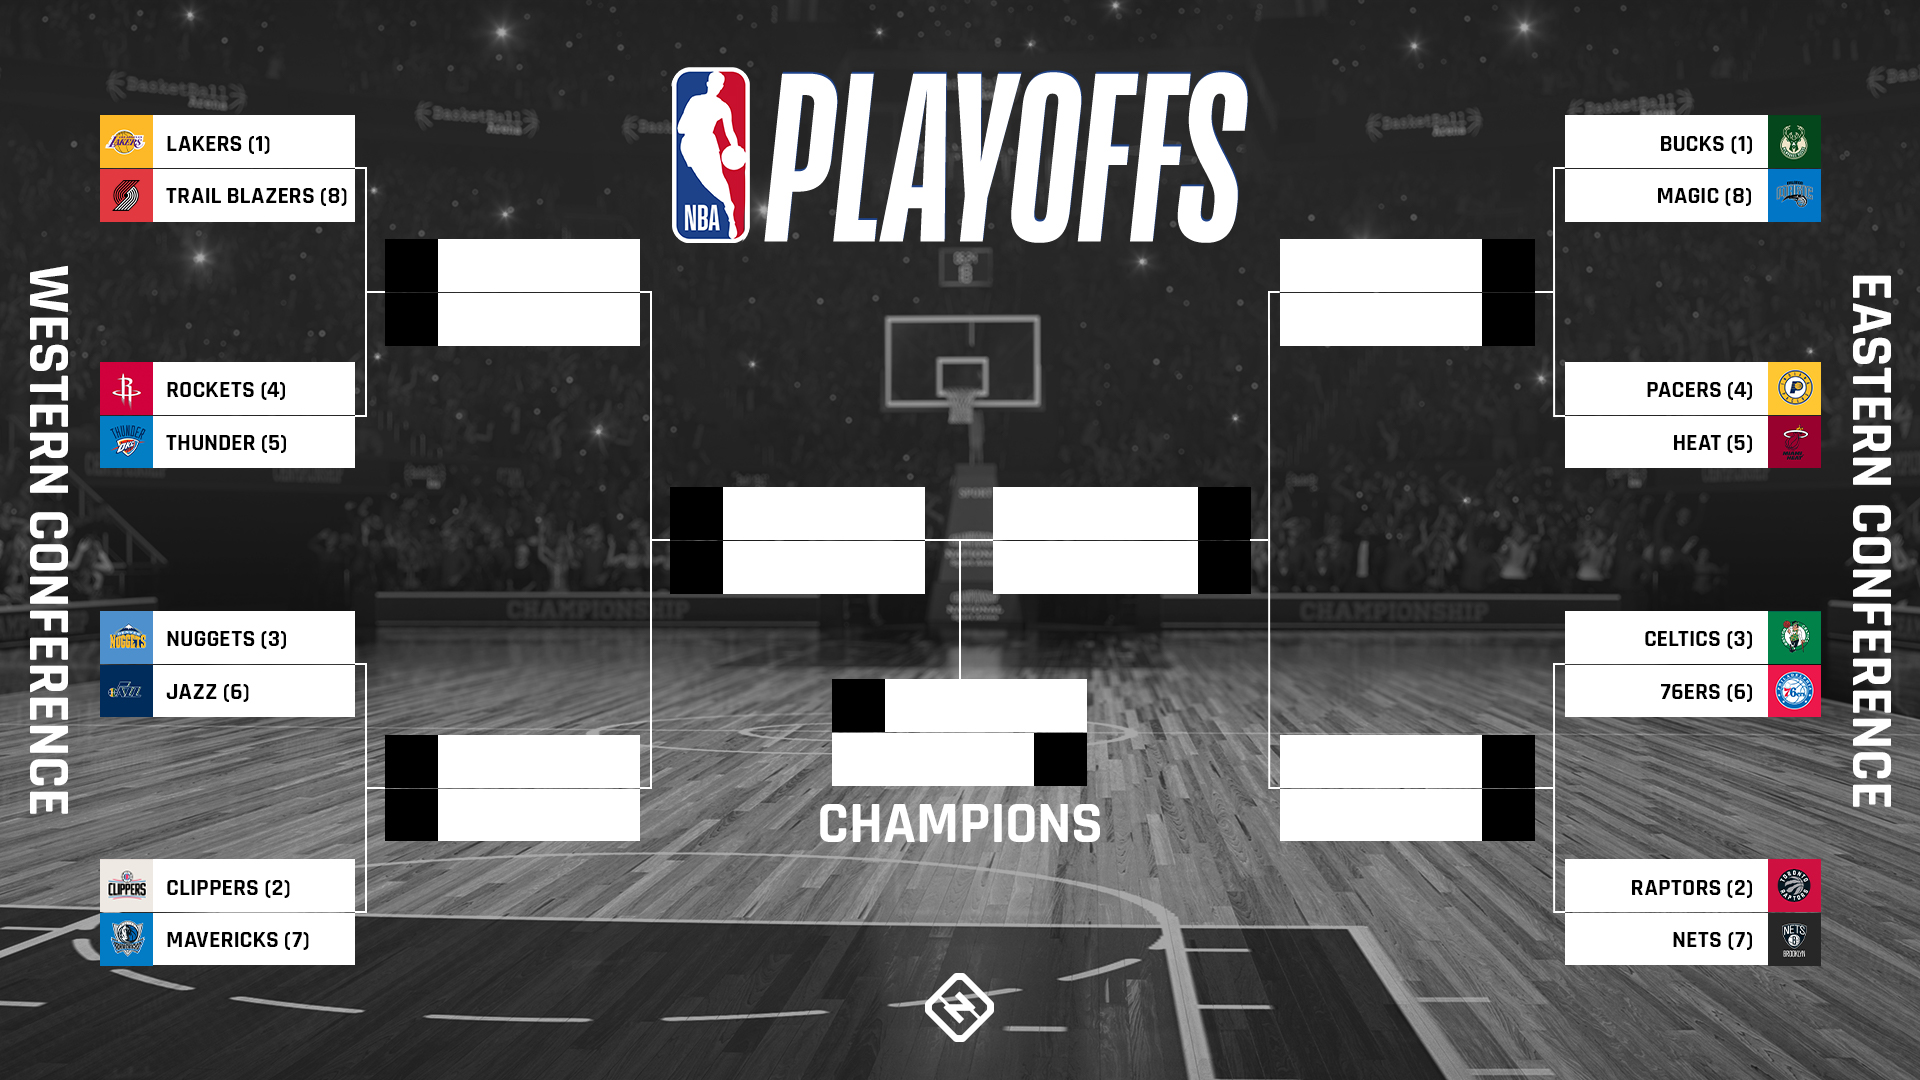 NBA playoff games today 2020: Live scores, TV schedule & more to watch Monday’s matchups in bubble